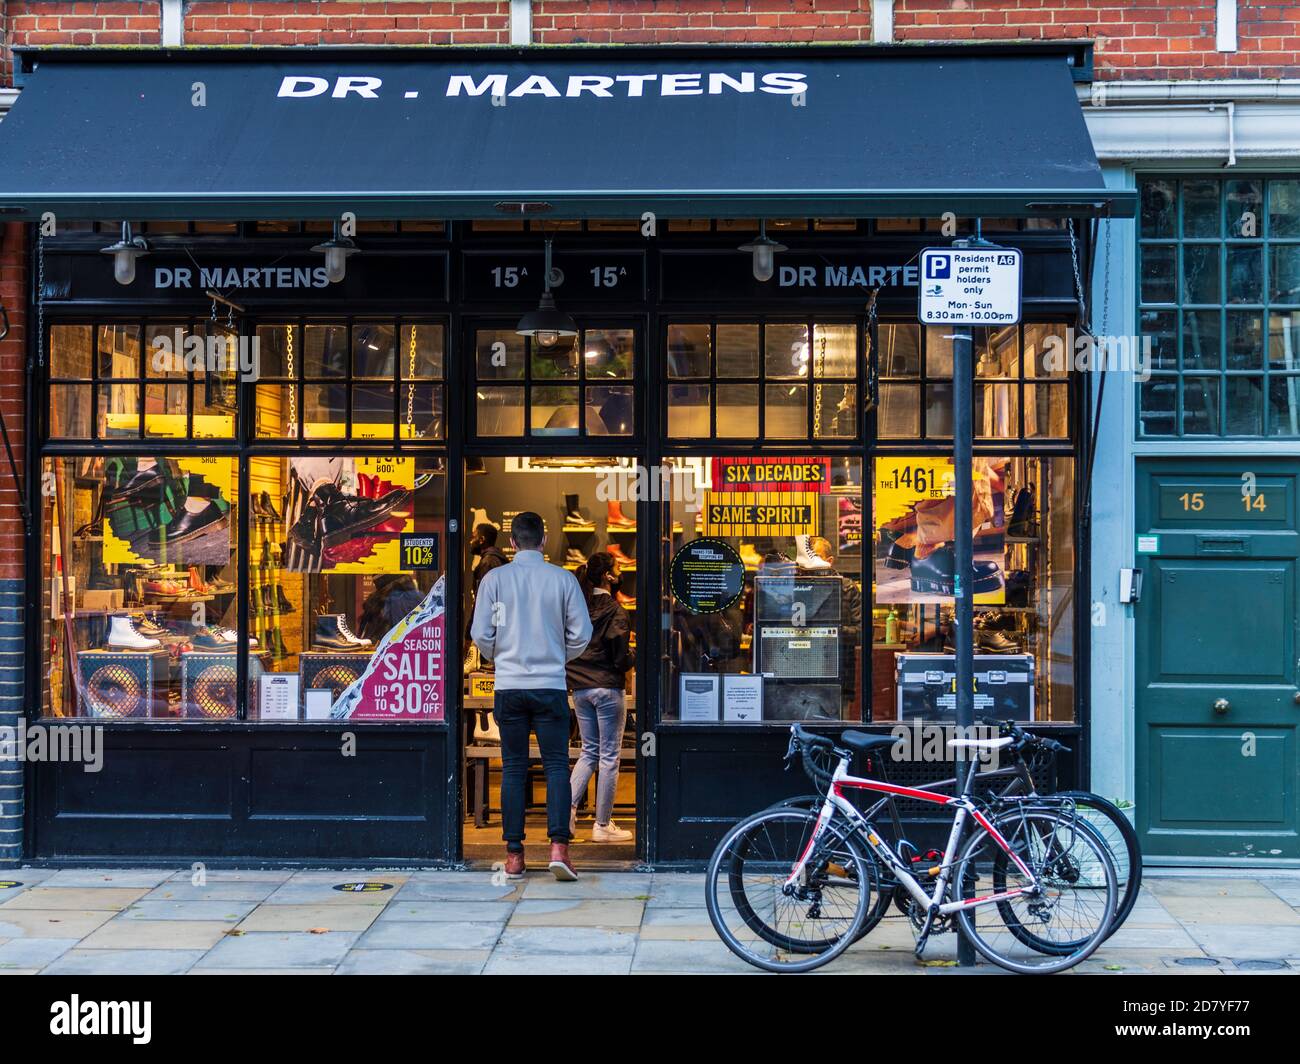 Dr Martens Store Spitalfields Market East London. Dr. Martens is an Iconic  British footwear brand founded in 1947 by Klaus Märtens Stock Photo - Alamy